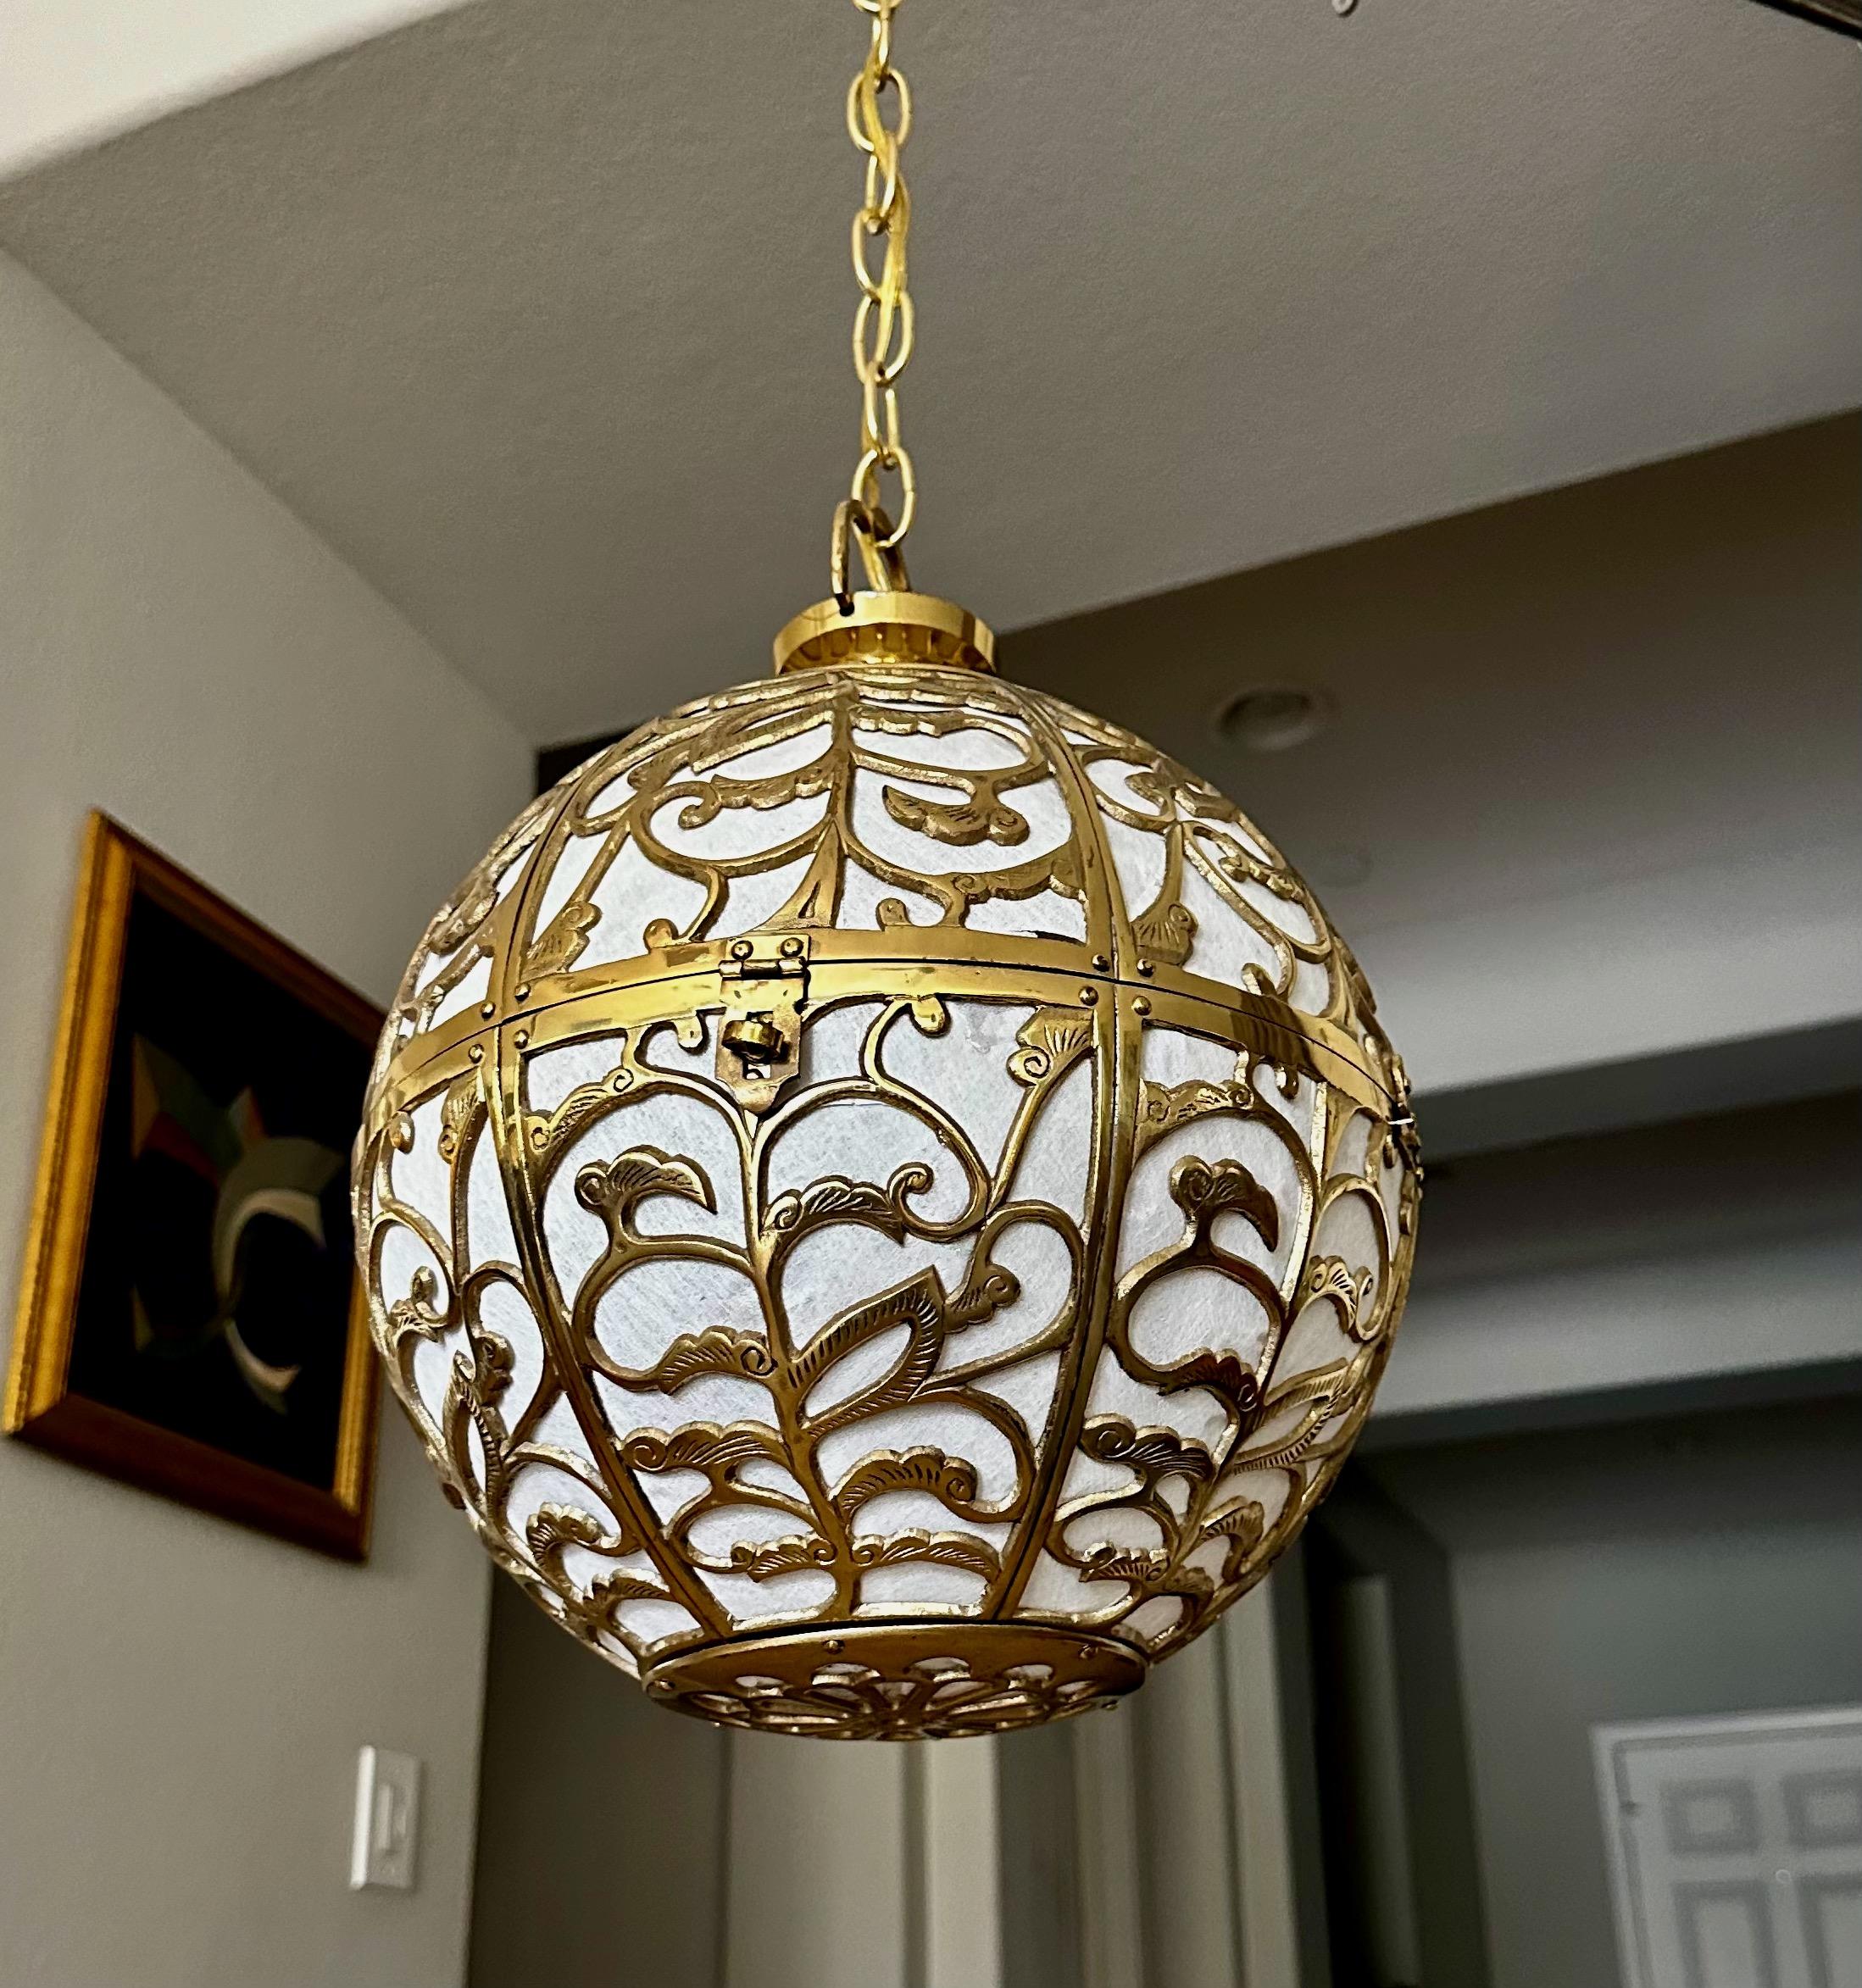 Brass pierced Asian chandelier or pendant light with scrolling arabesque pattern motif. Handcrafted from thick solid brass interior covered in rice paper giving the light a diffused soft warm glow. The fixture is near perfect condition, possibly